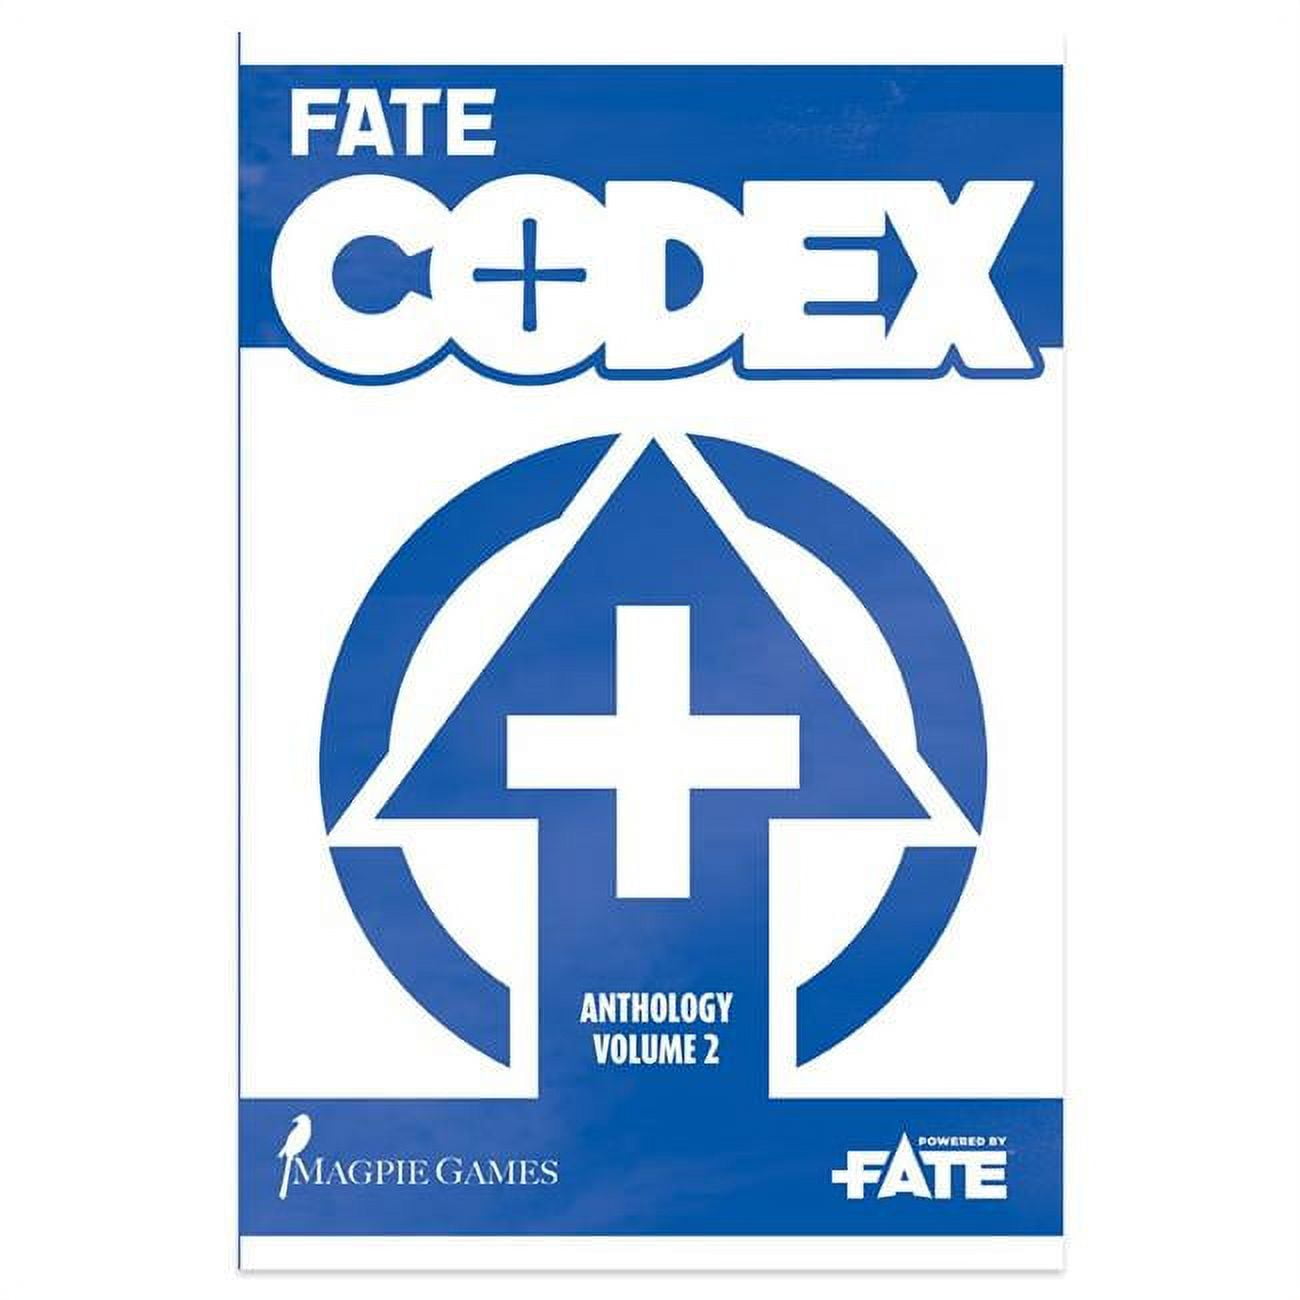 Maefc200 Fate Codex Anthology - Year Two - Fate Rpg